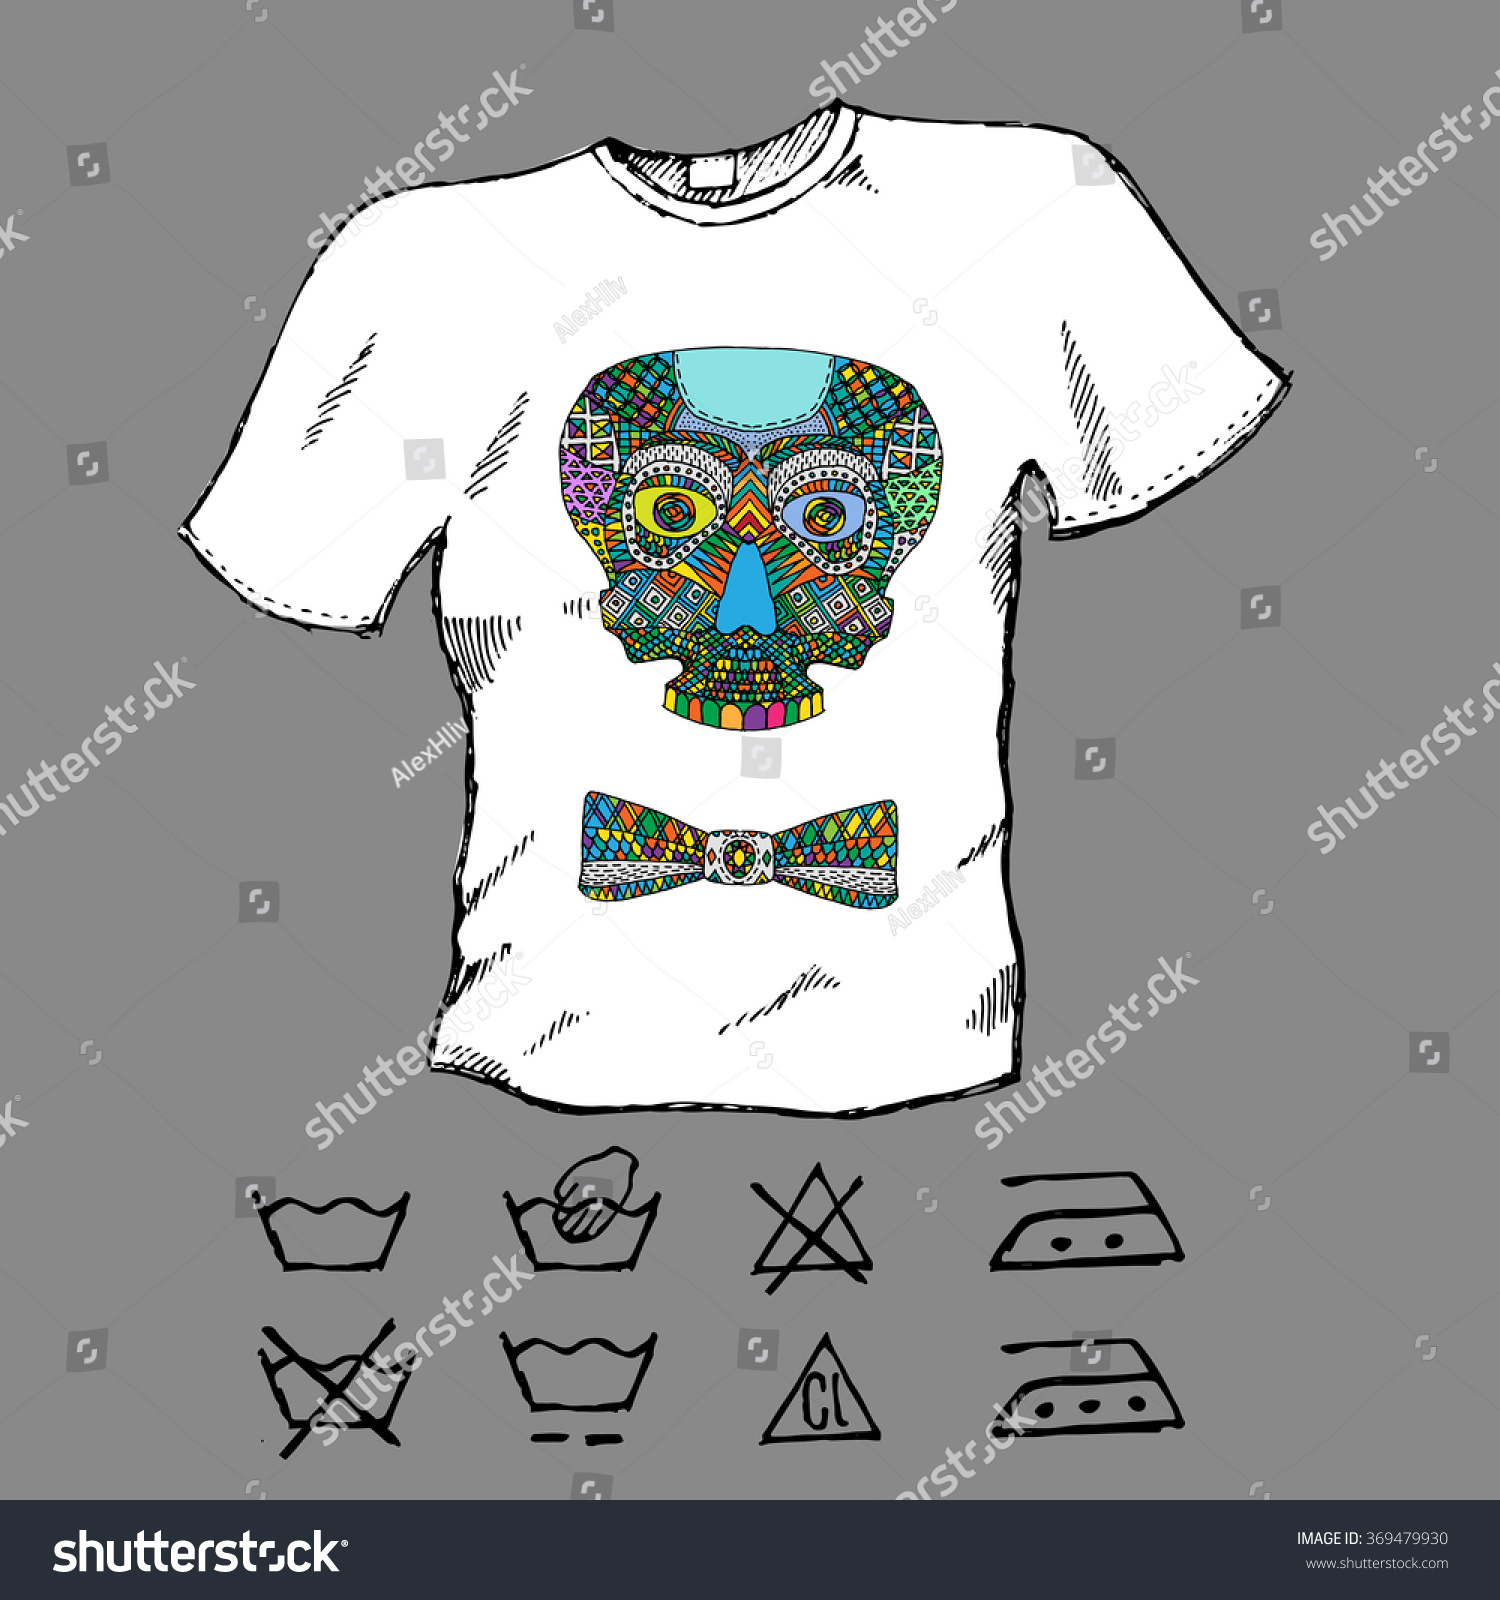 SVG of T-shirt design. Hand drawn white shirt with colorful skull and bowtie. Laundry care icons. Vector illustration svg